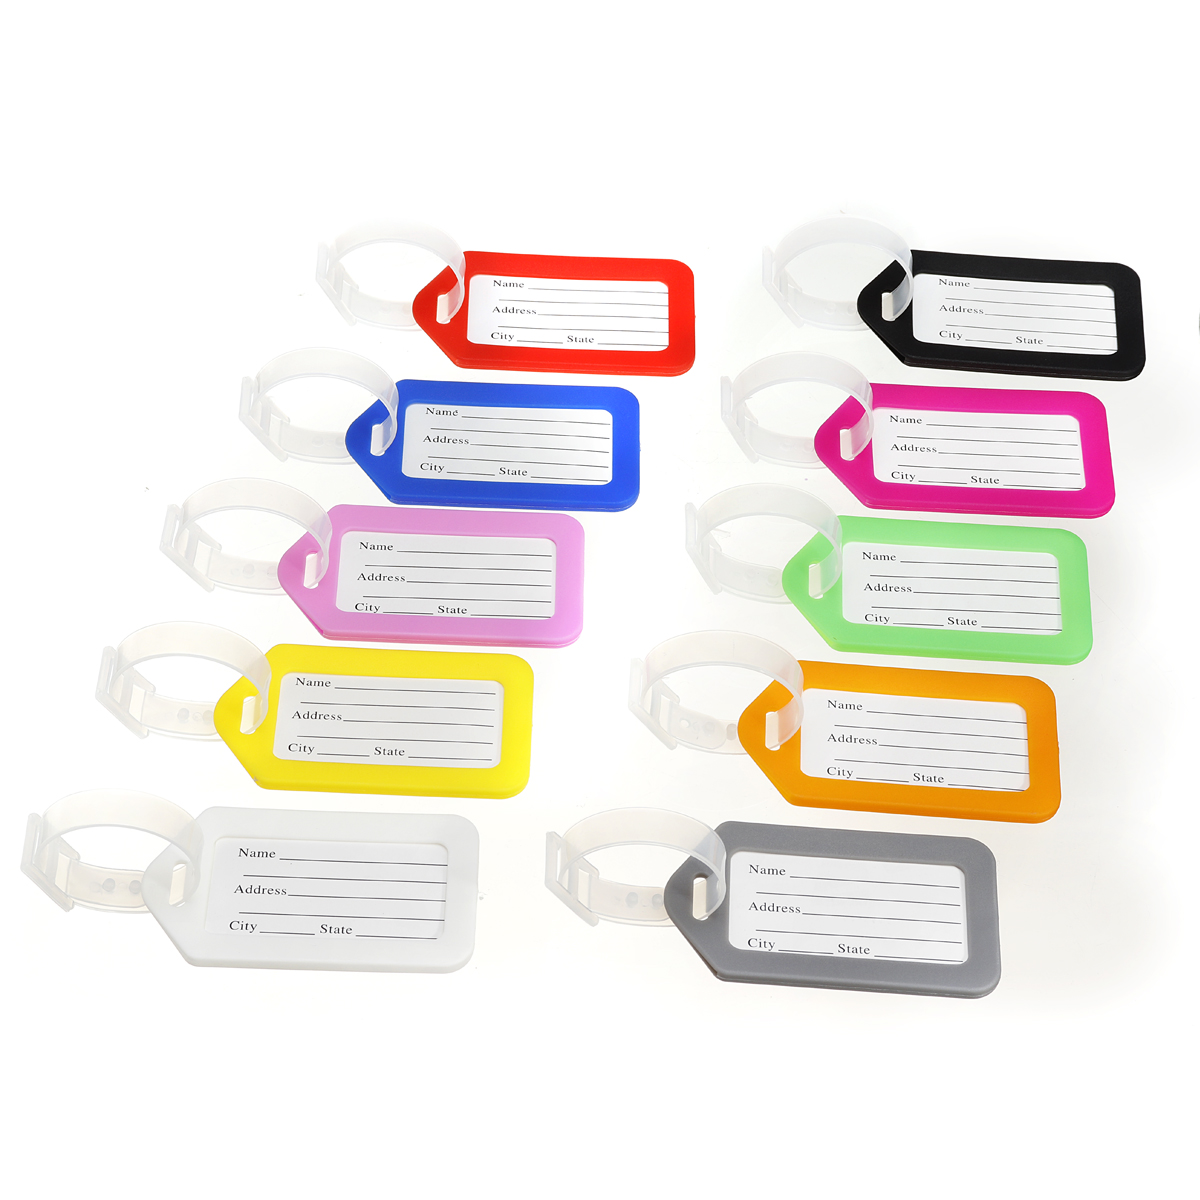 10-Pcs-Luggage-Bag-Tag-Name-Address-ID-Label-Plastic-Travel-Bag-Tags-for-Suitcase-Bag-1714336-4